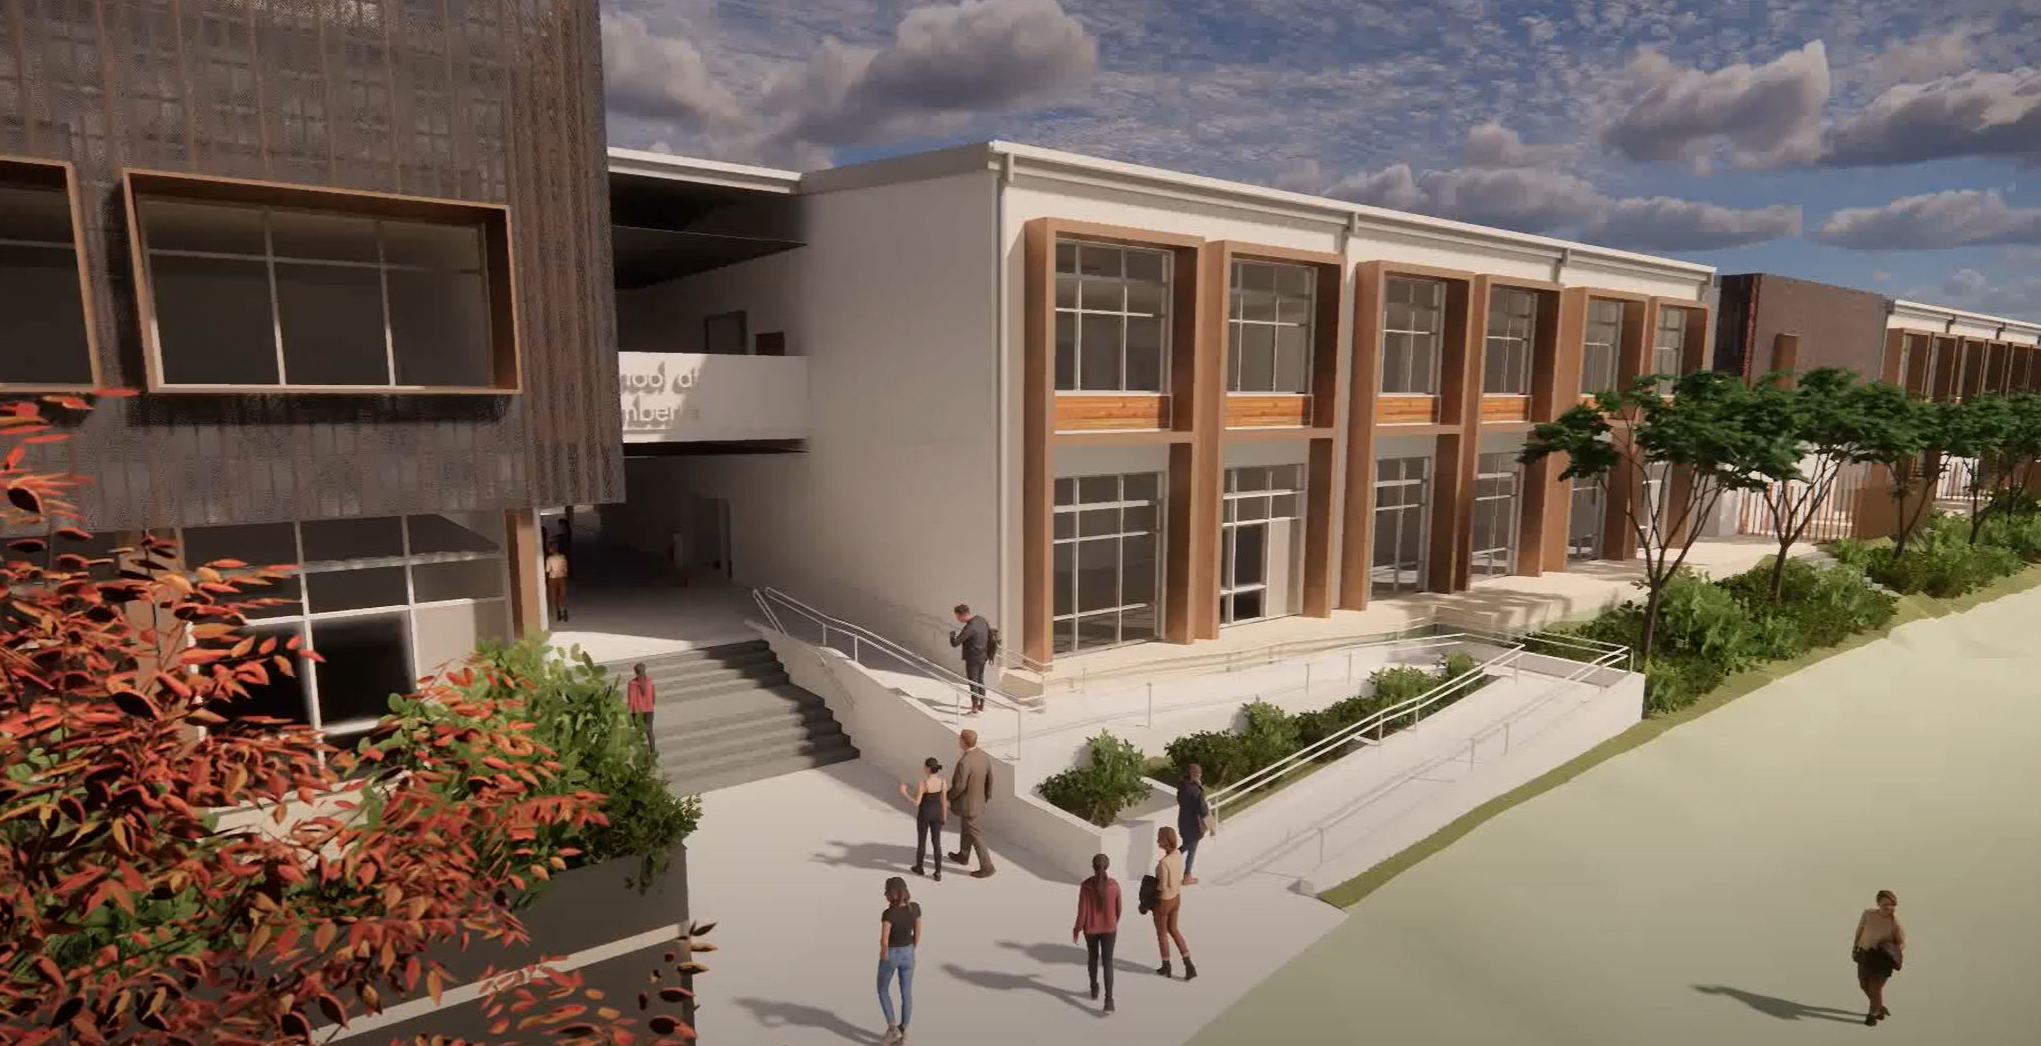 Impression of the new high school in Jerrabomberra.